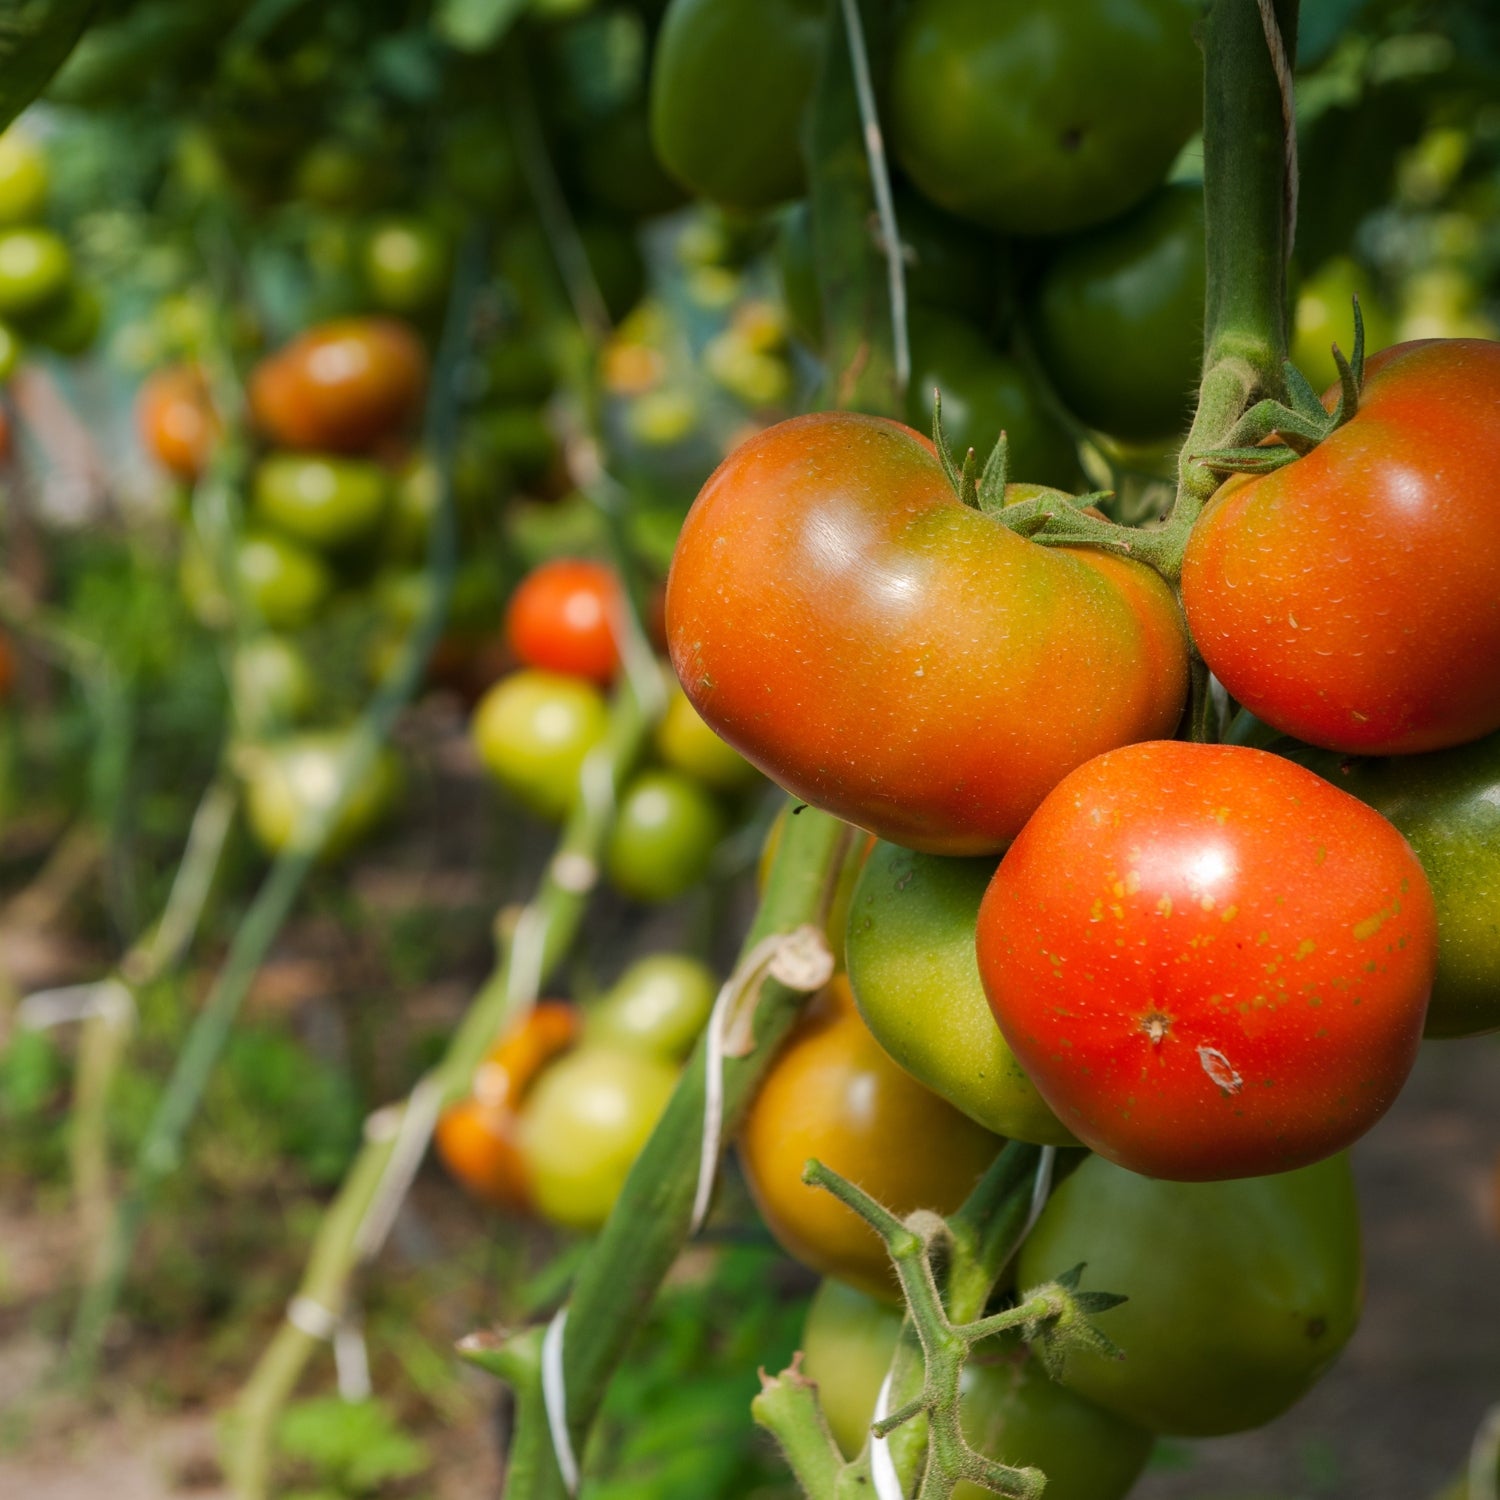 Tomatoes Grown With KNF Inputs